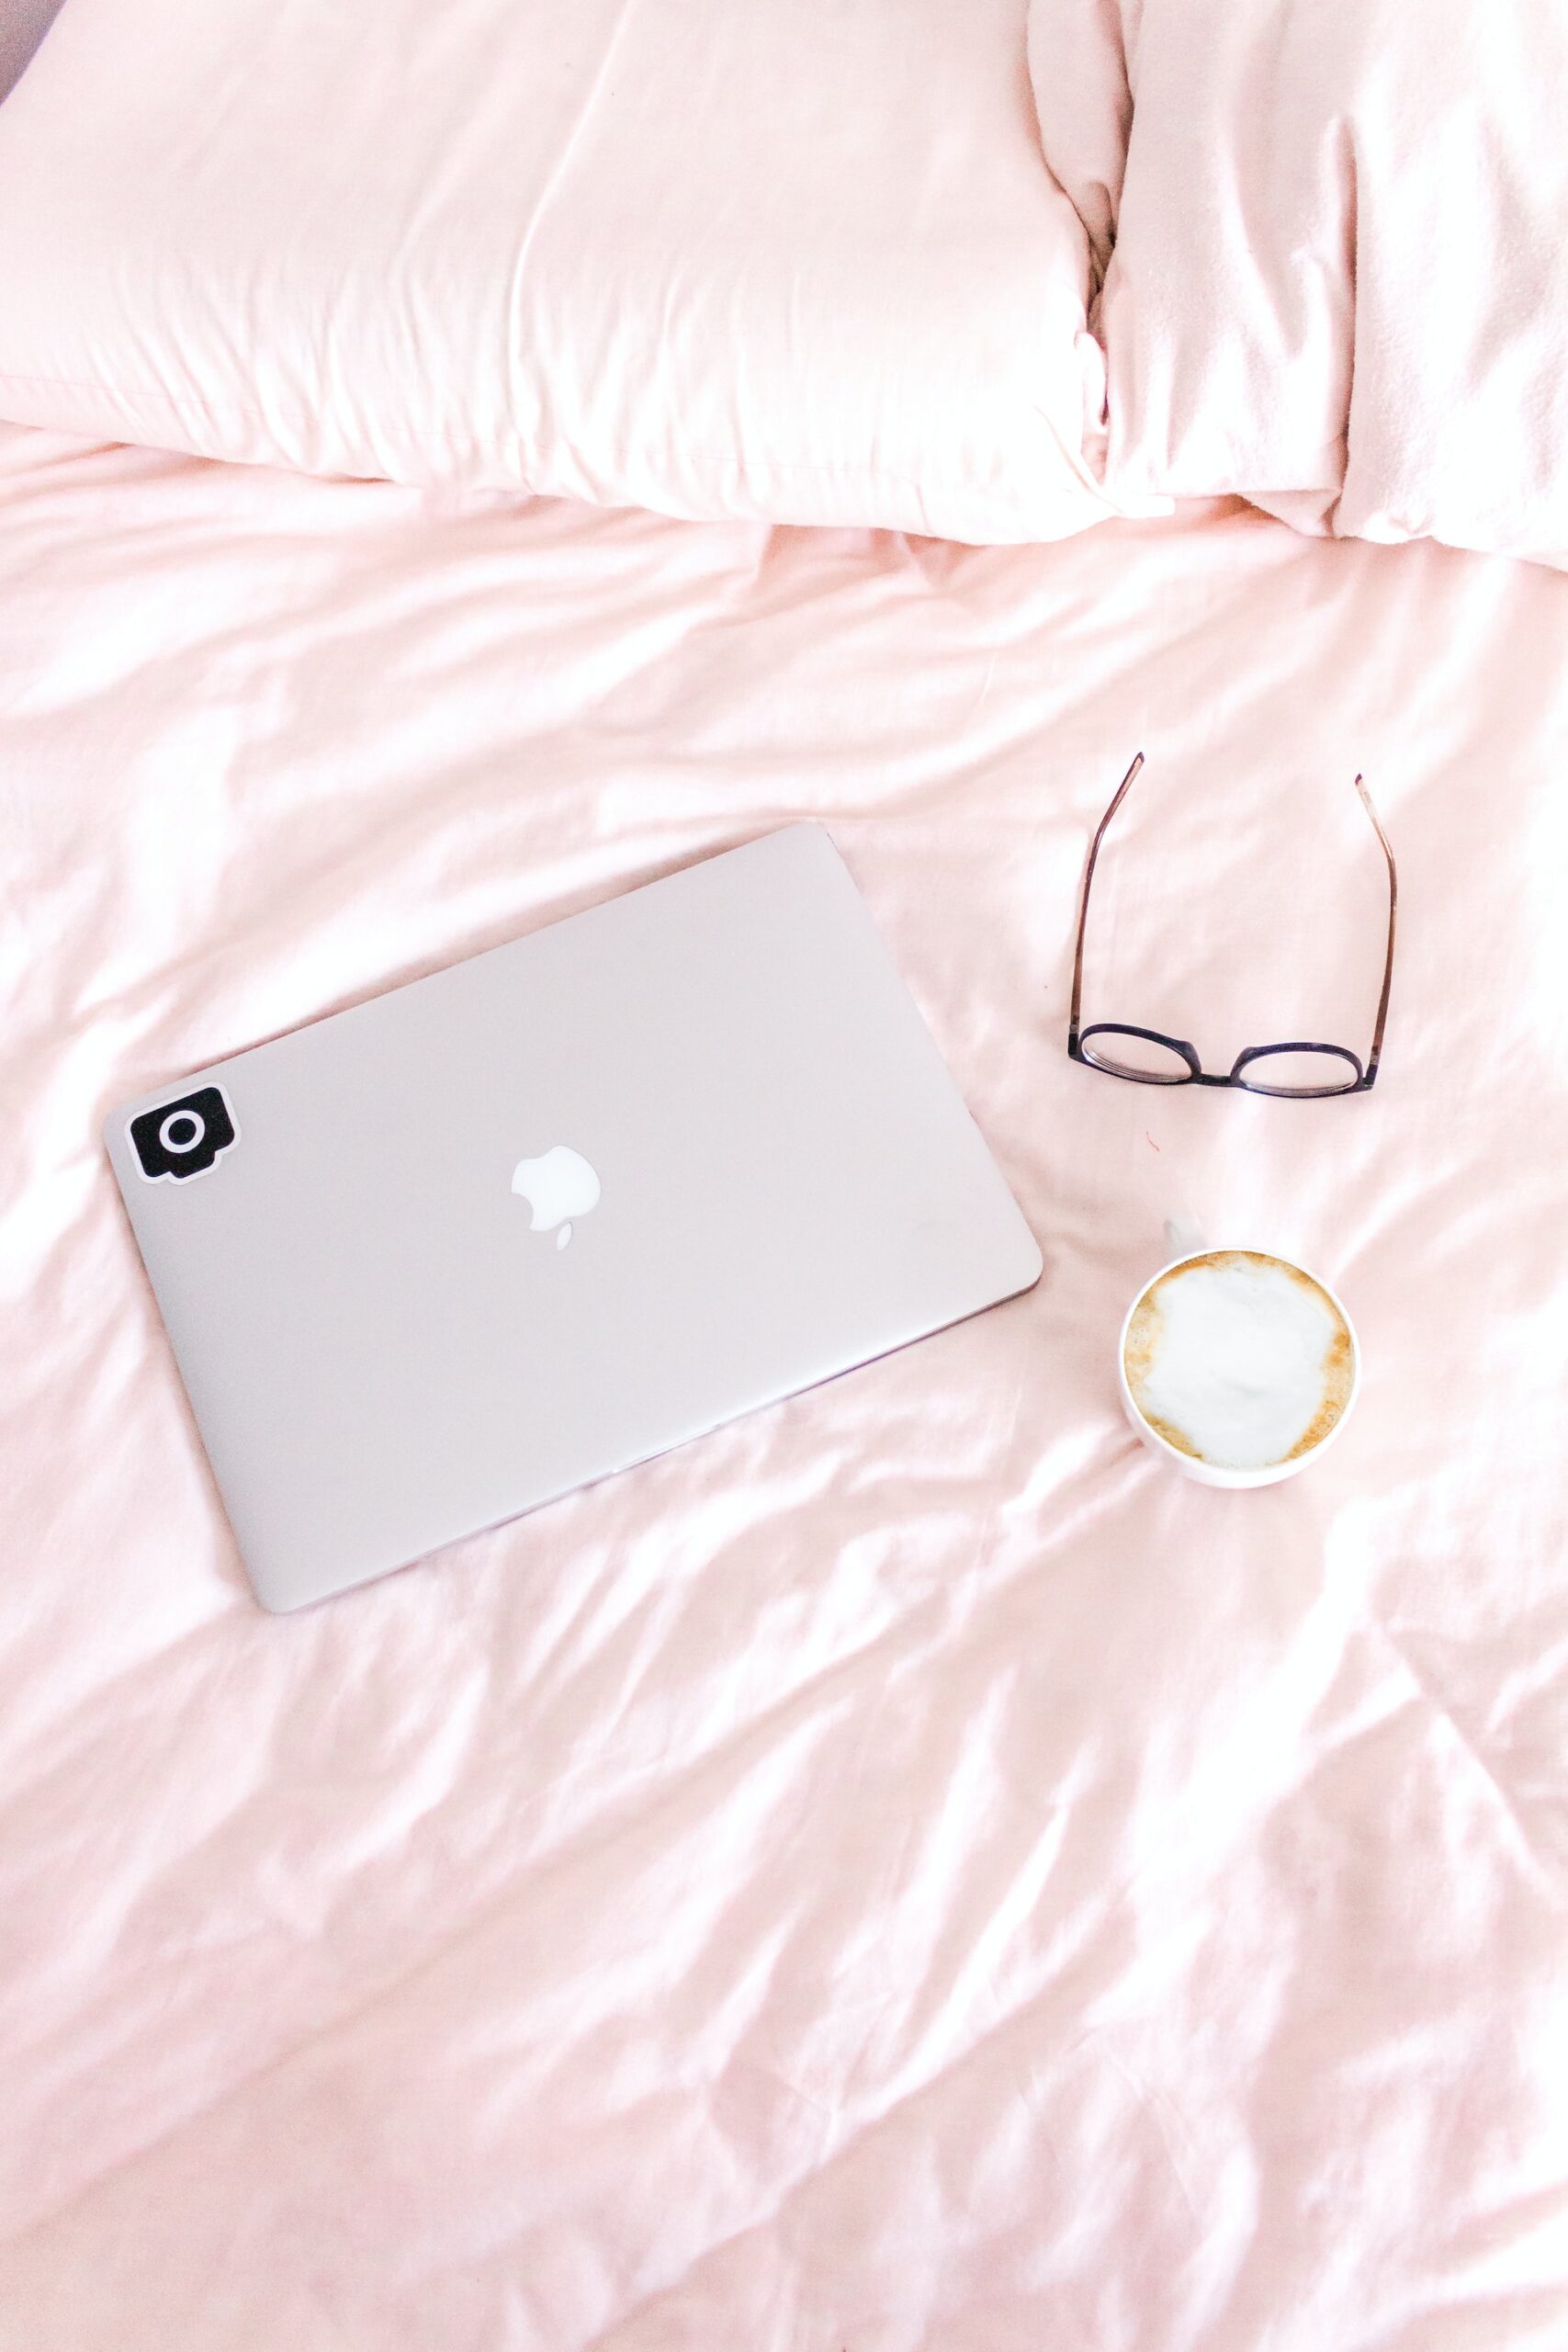 A photographer's laptop laying on a pink bedspread with coffee and a pair of glasses